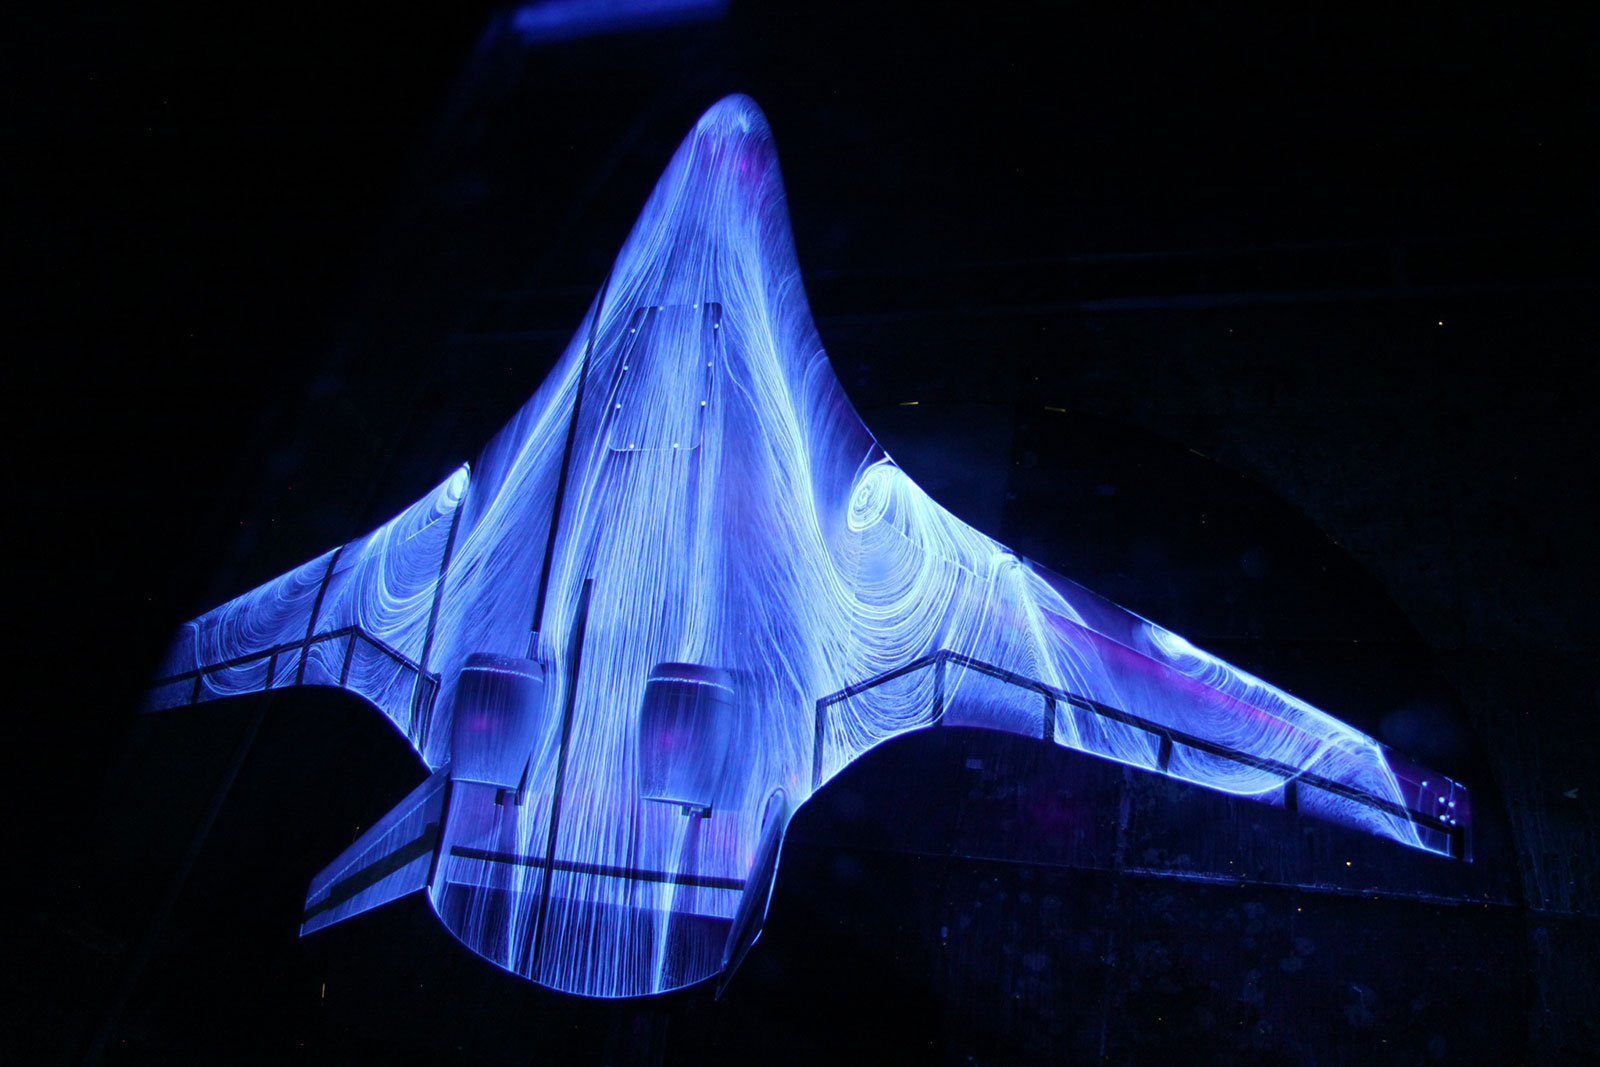 A futuristic hybrid wing body during tests in the wind tunnel at NASA's Langley Research Center. The patterns are formed by air movement over the fluorescent oil sprayed onto the wings